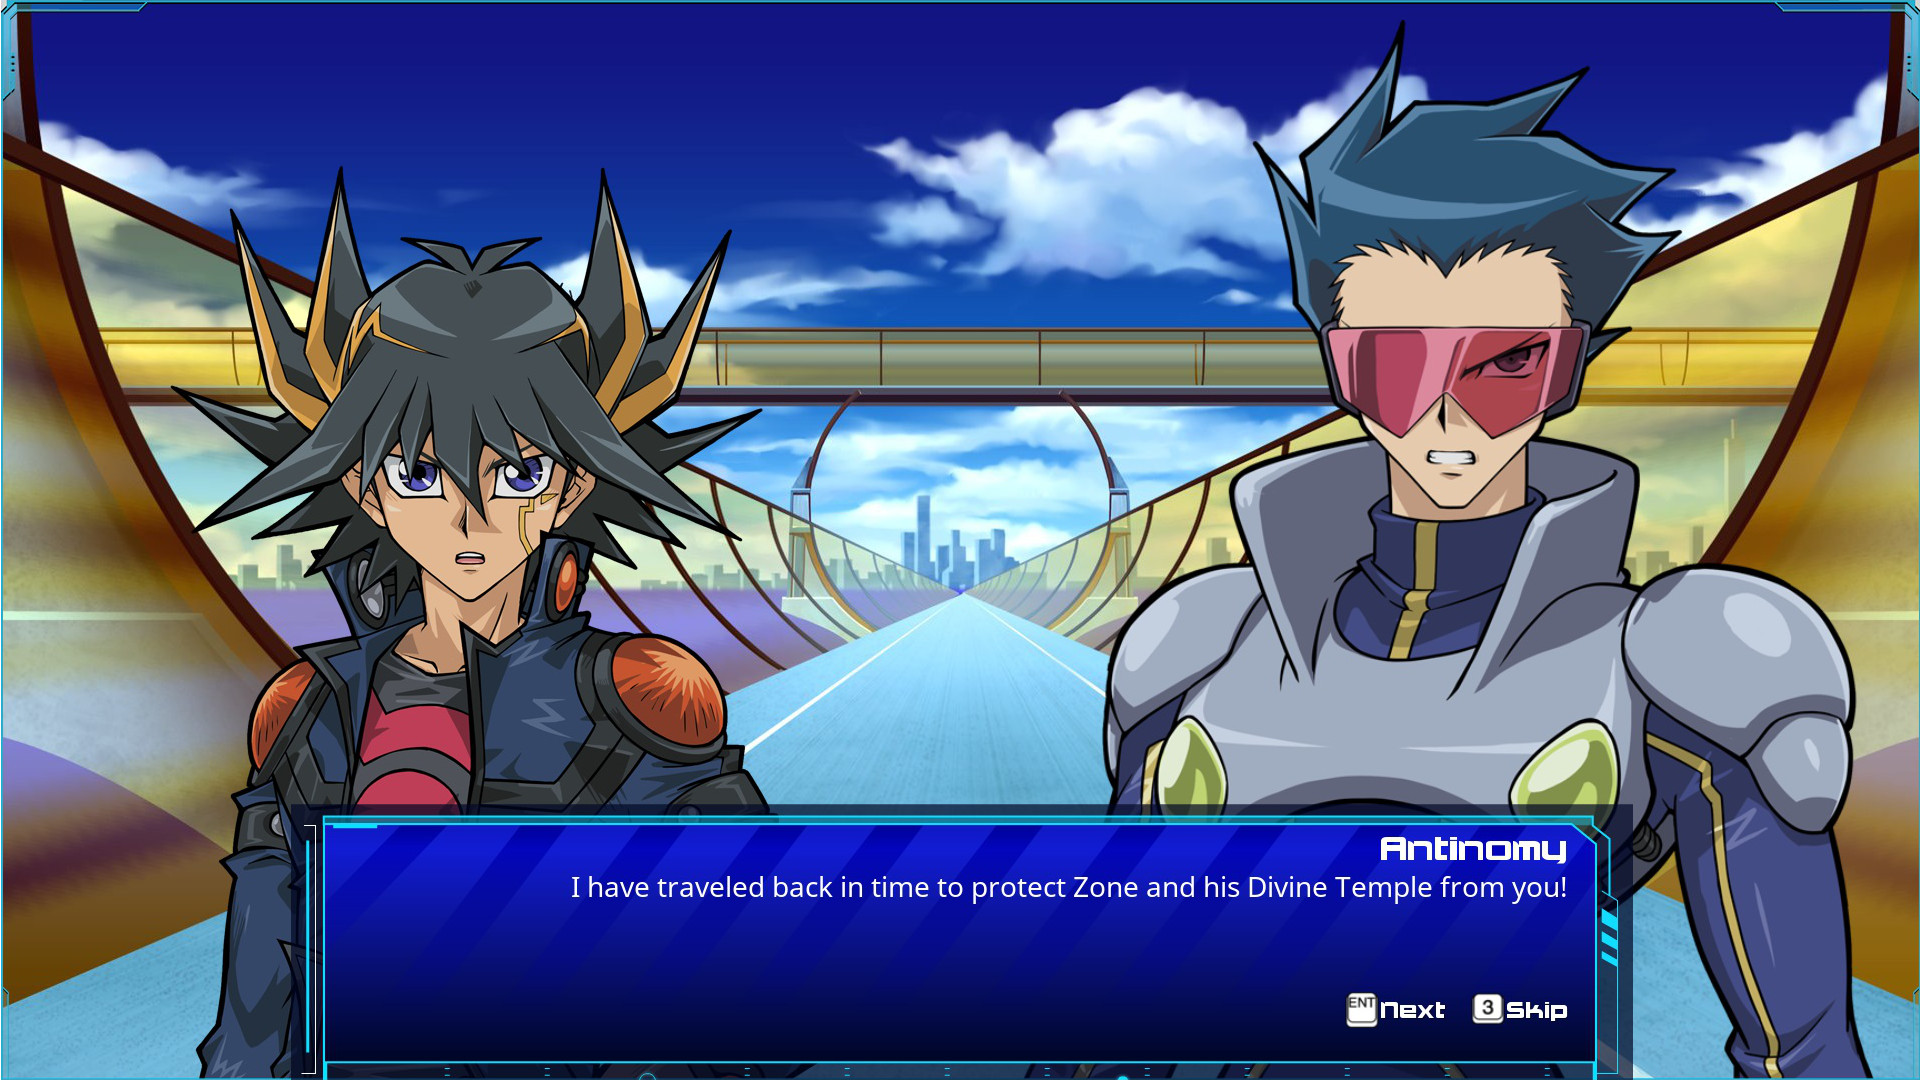 Yu-Gi-Oh! - 5D’s For the Future DLC Steam CD Key 1.04 $